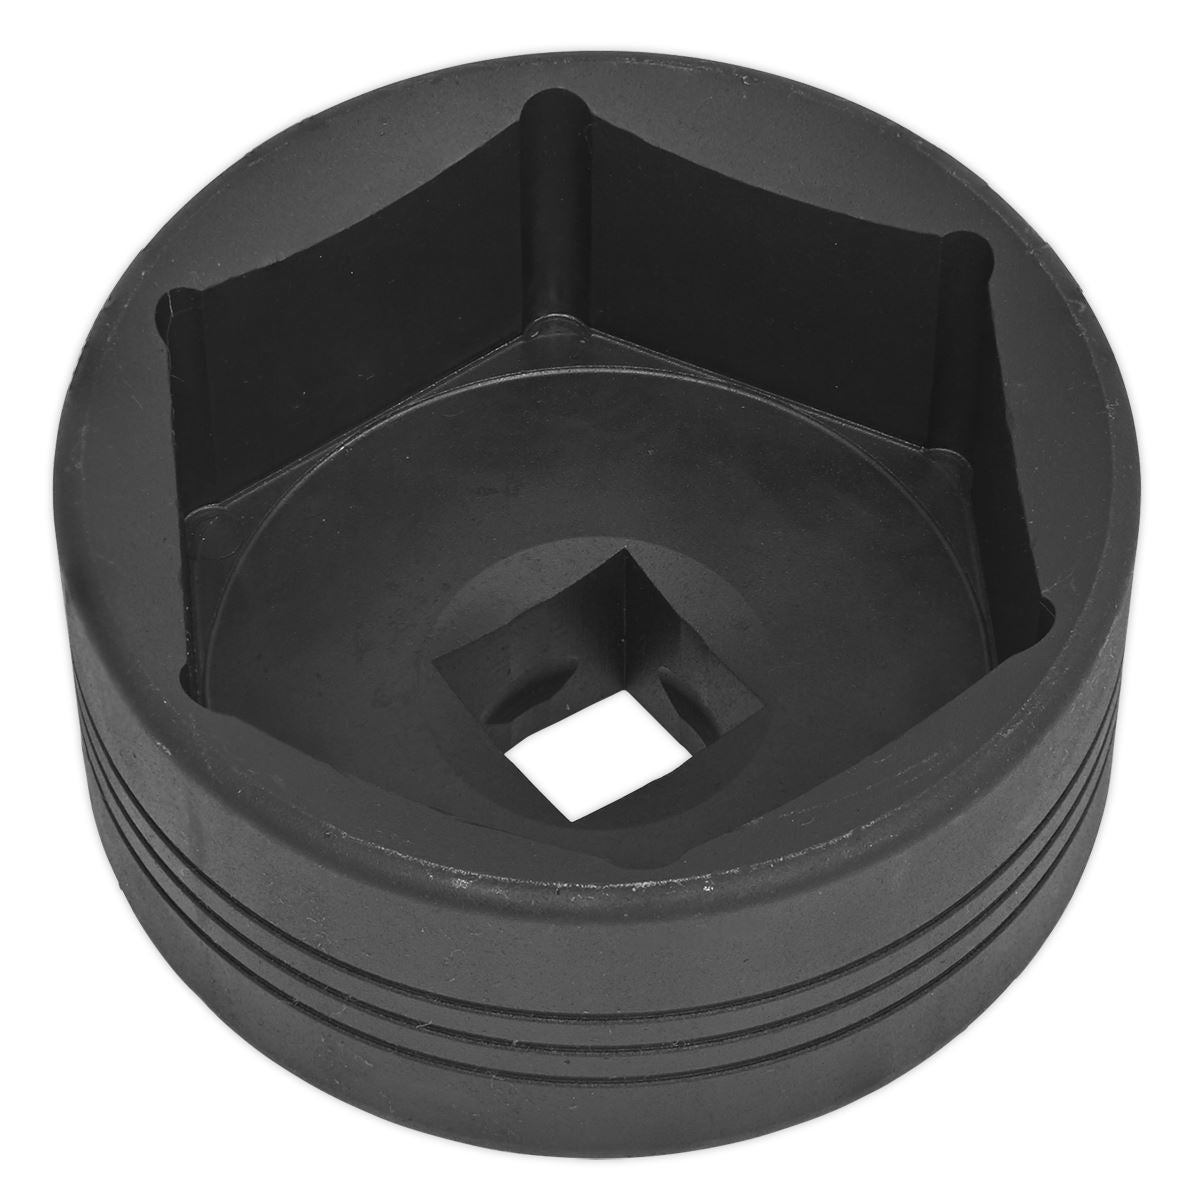 Sealey Impact Socket 85mm 1"Sq Drive Commercial